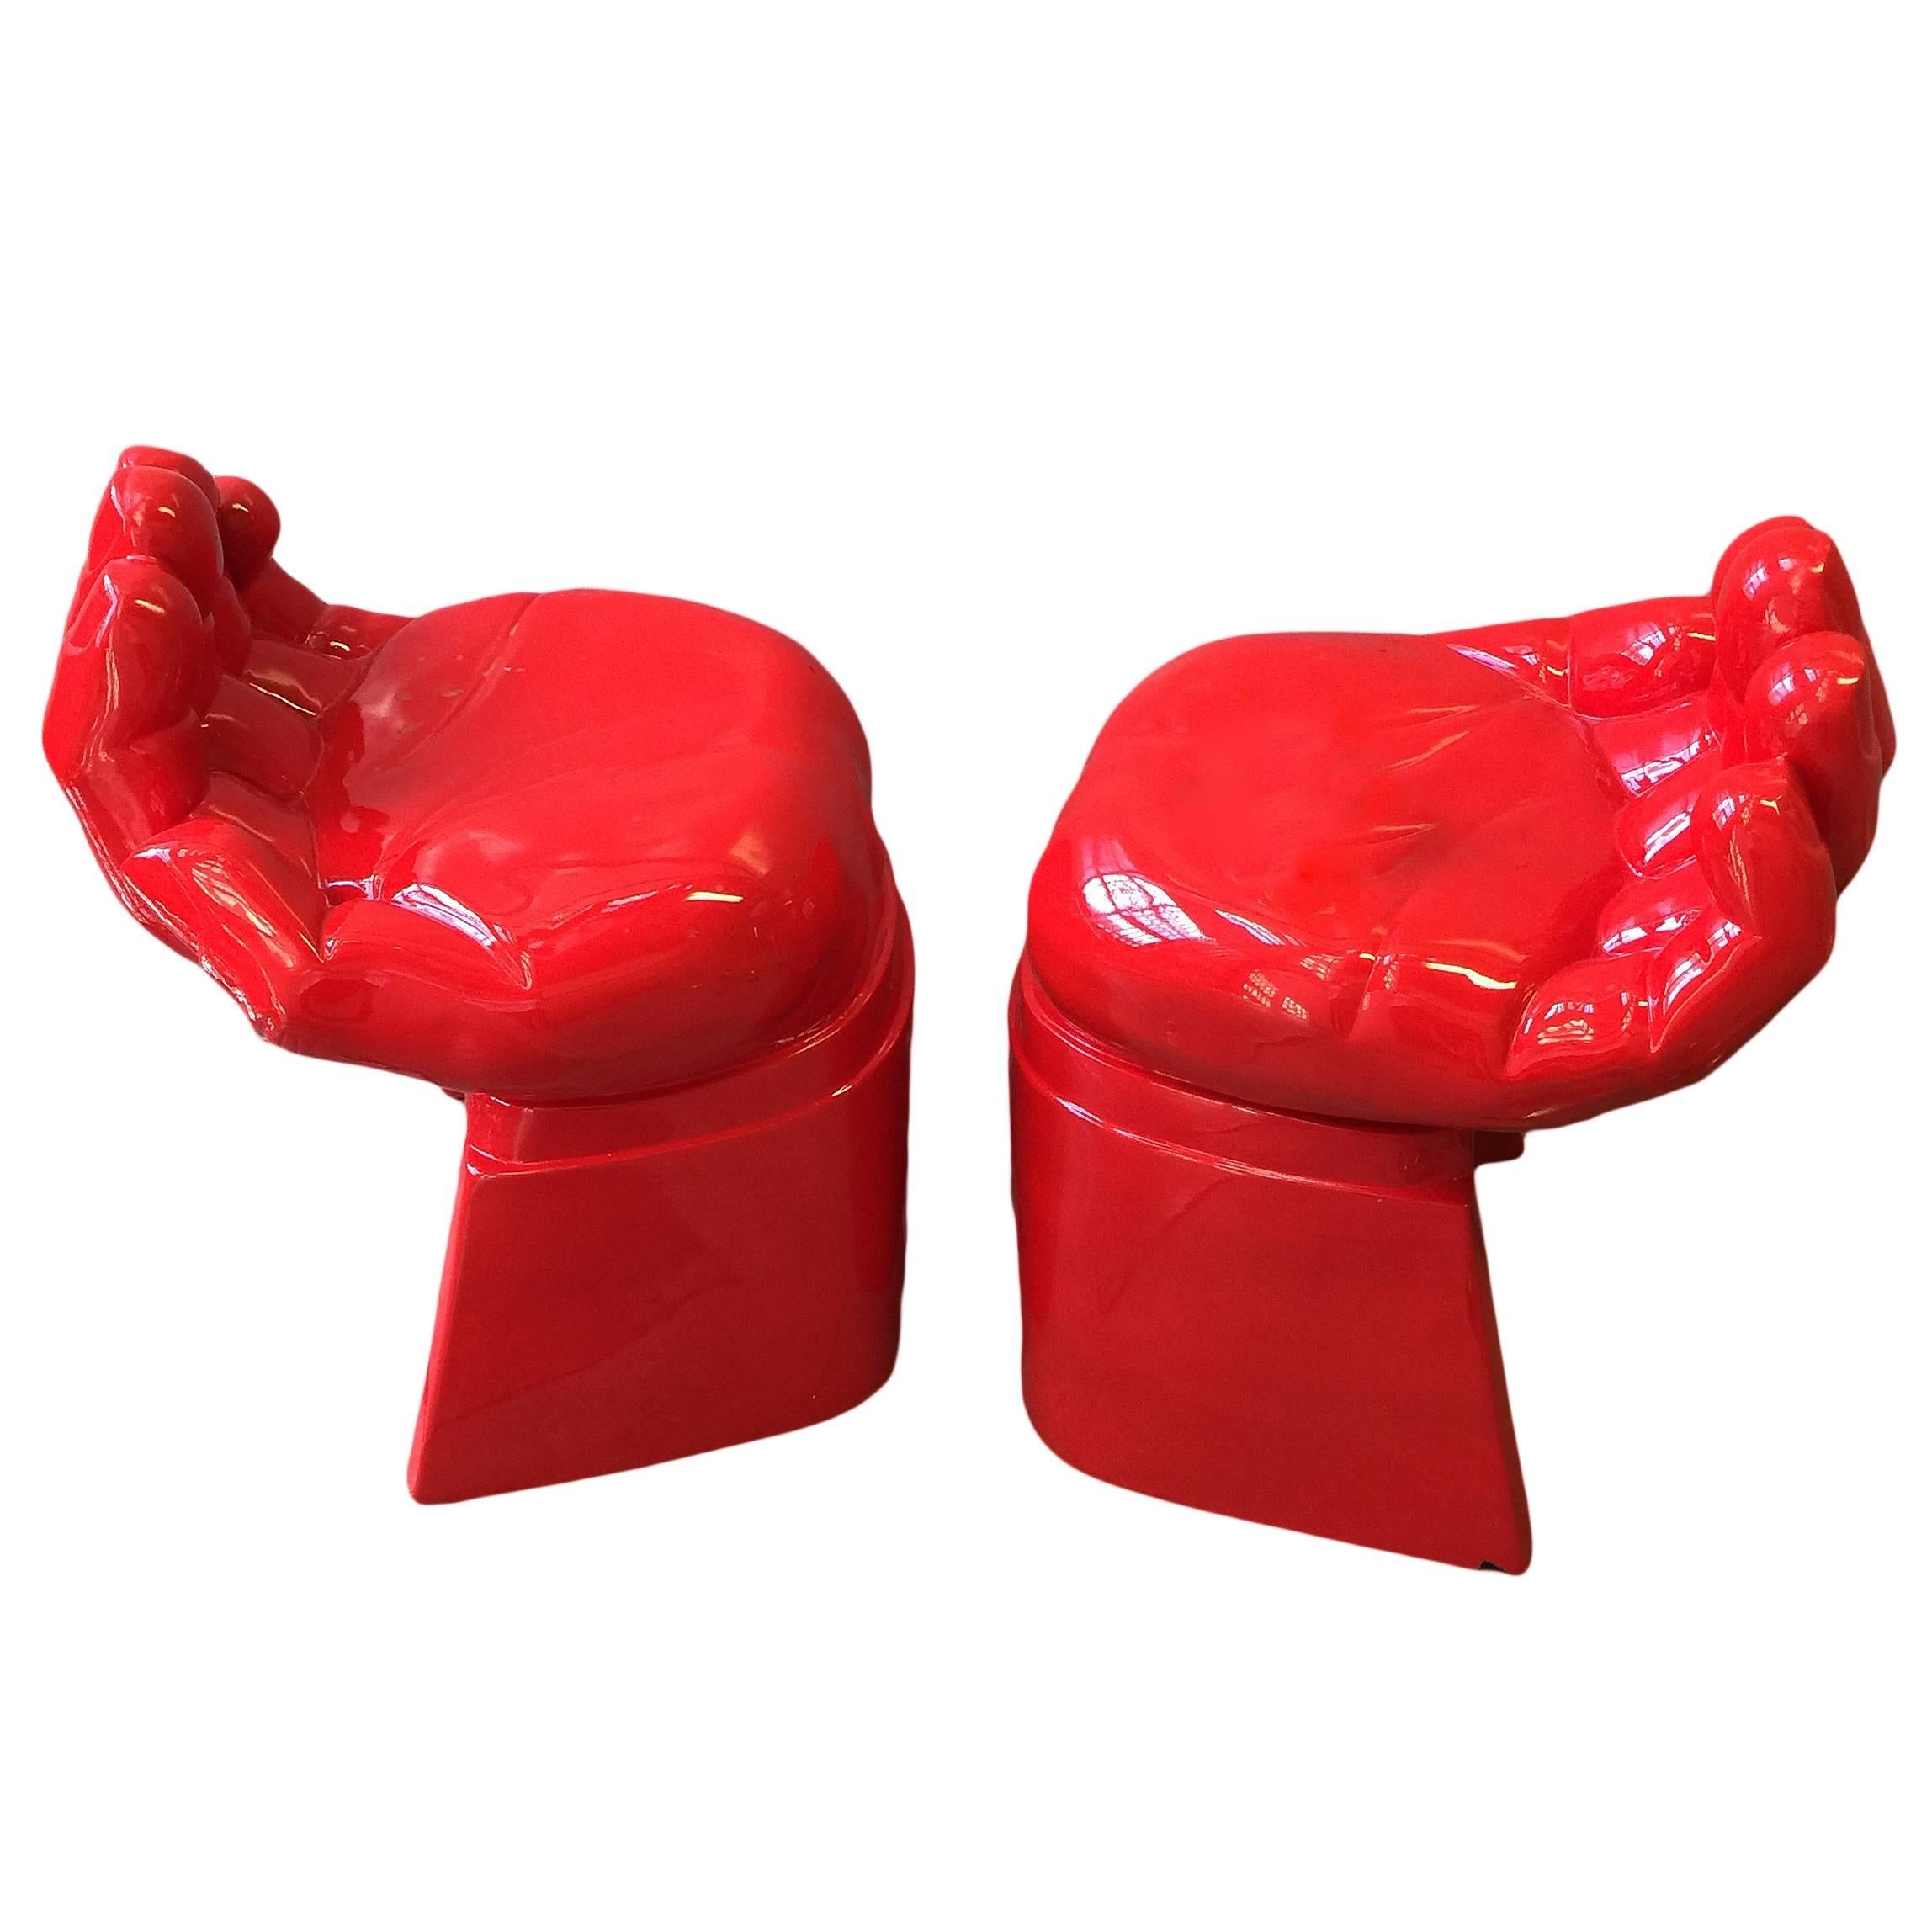 Set of Resin Cast Hand Chairs, Sold Individually